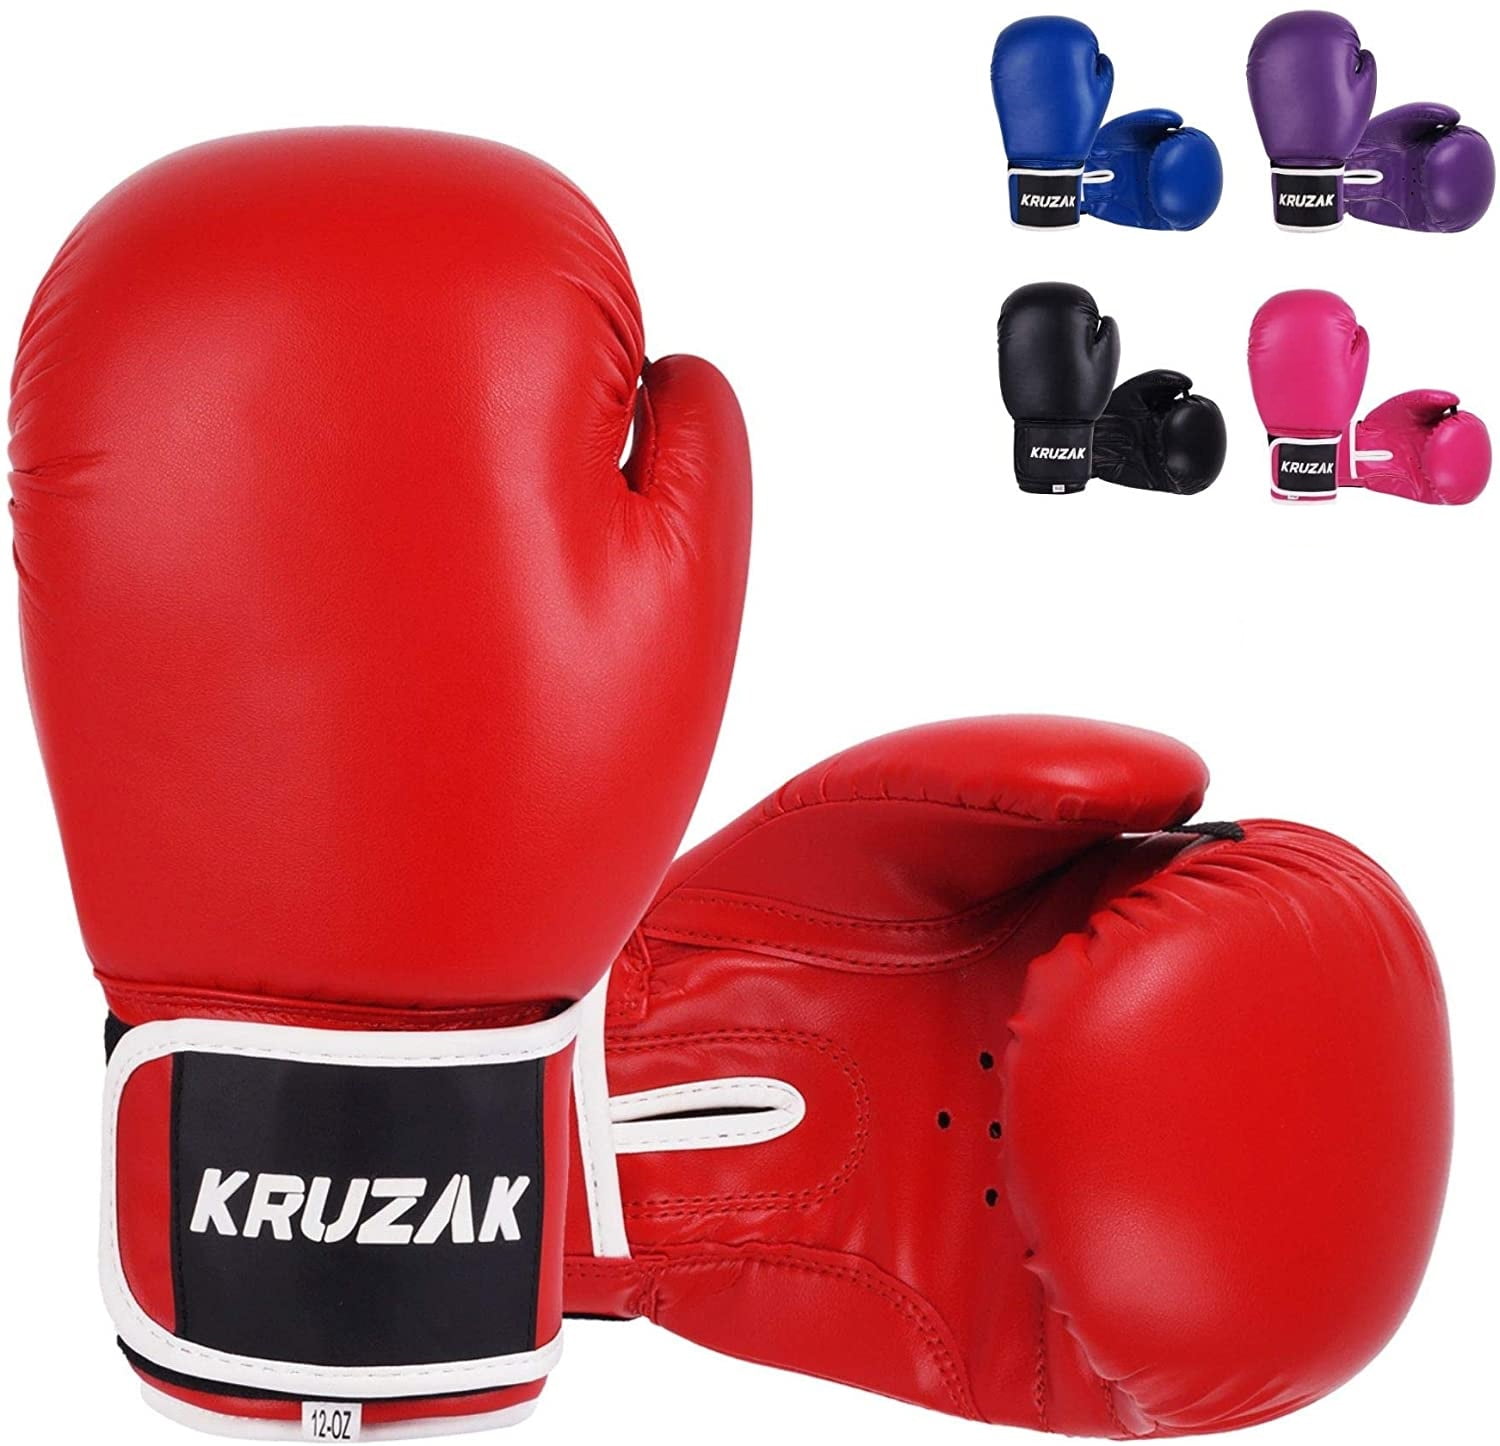 2 PAIRS 16 OZ BOXING TRAINING PRACTICE GLOVES w/ HEAD GEAR PROTECTION RED BLACK 